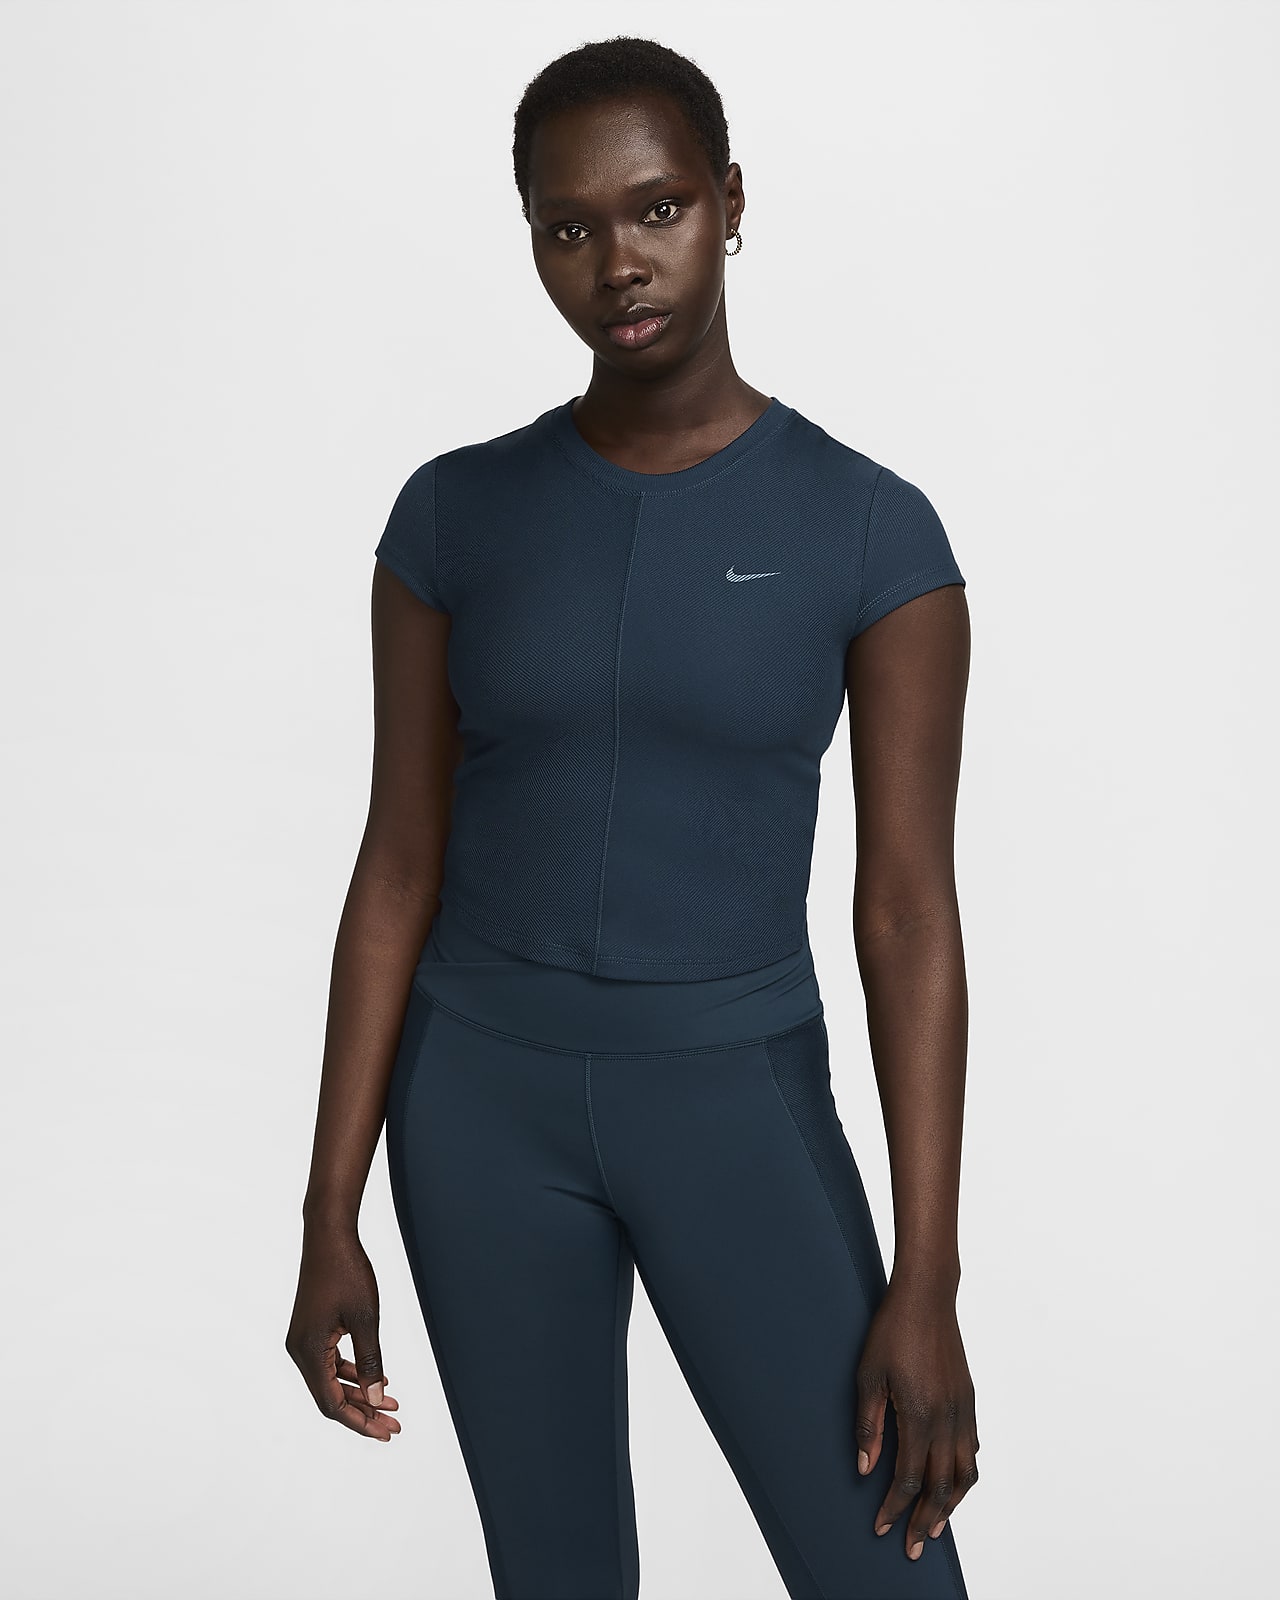 Nike One Fitted Rib Women's Dri-FIT Short-Sleeve Cropped Top